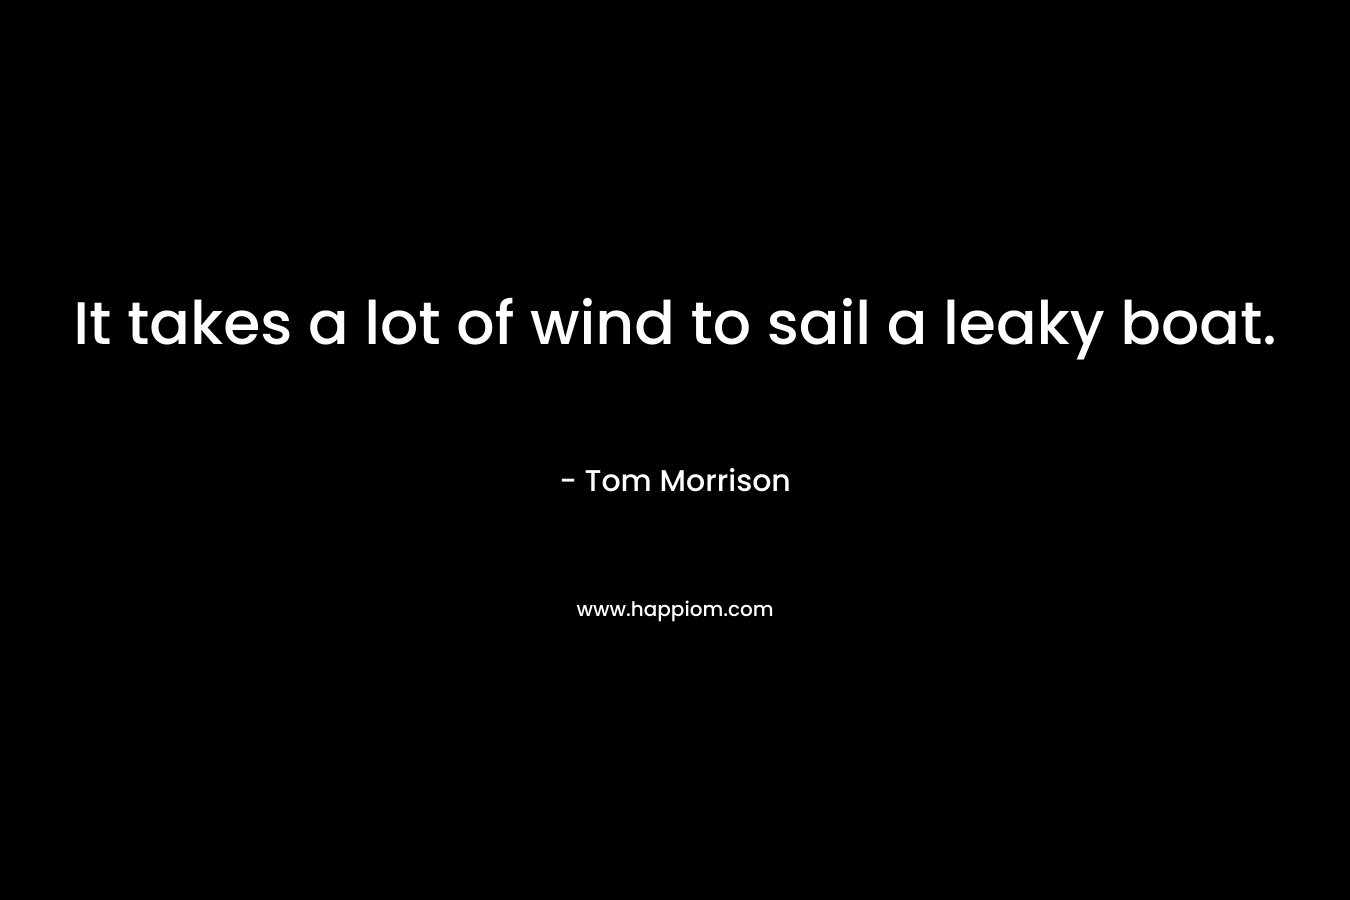 It takes a lot of wind to sail a leaky boat. – Tom Morrison